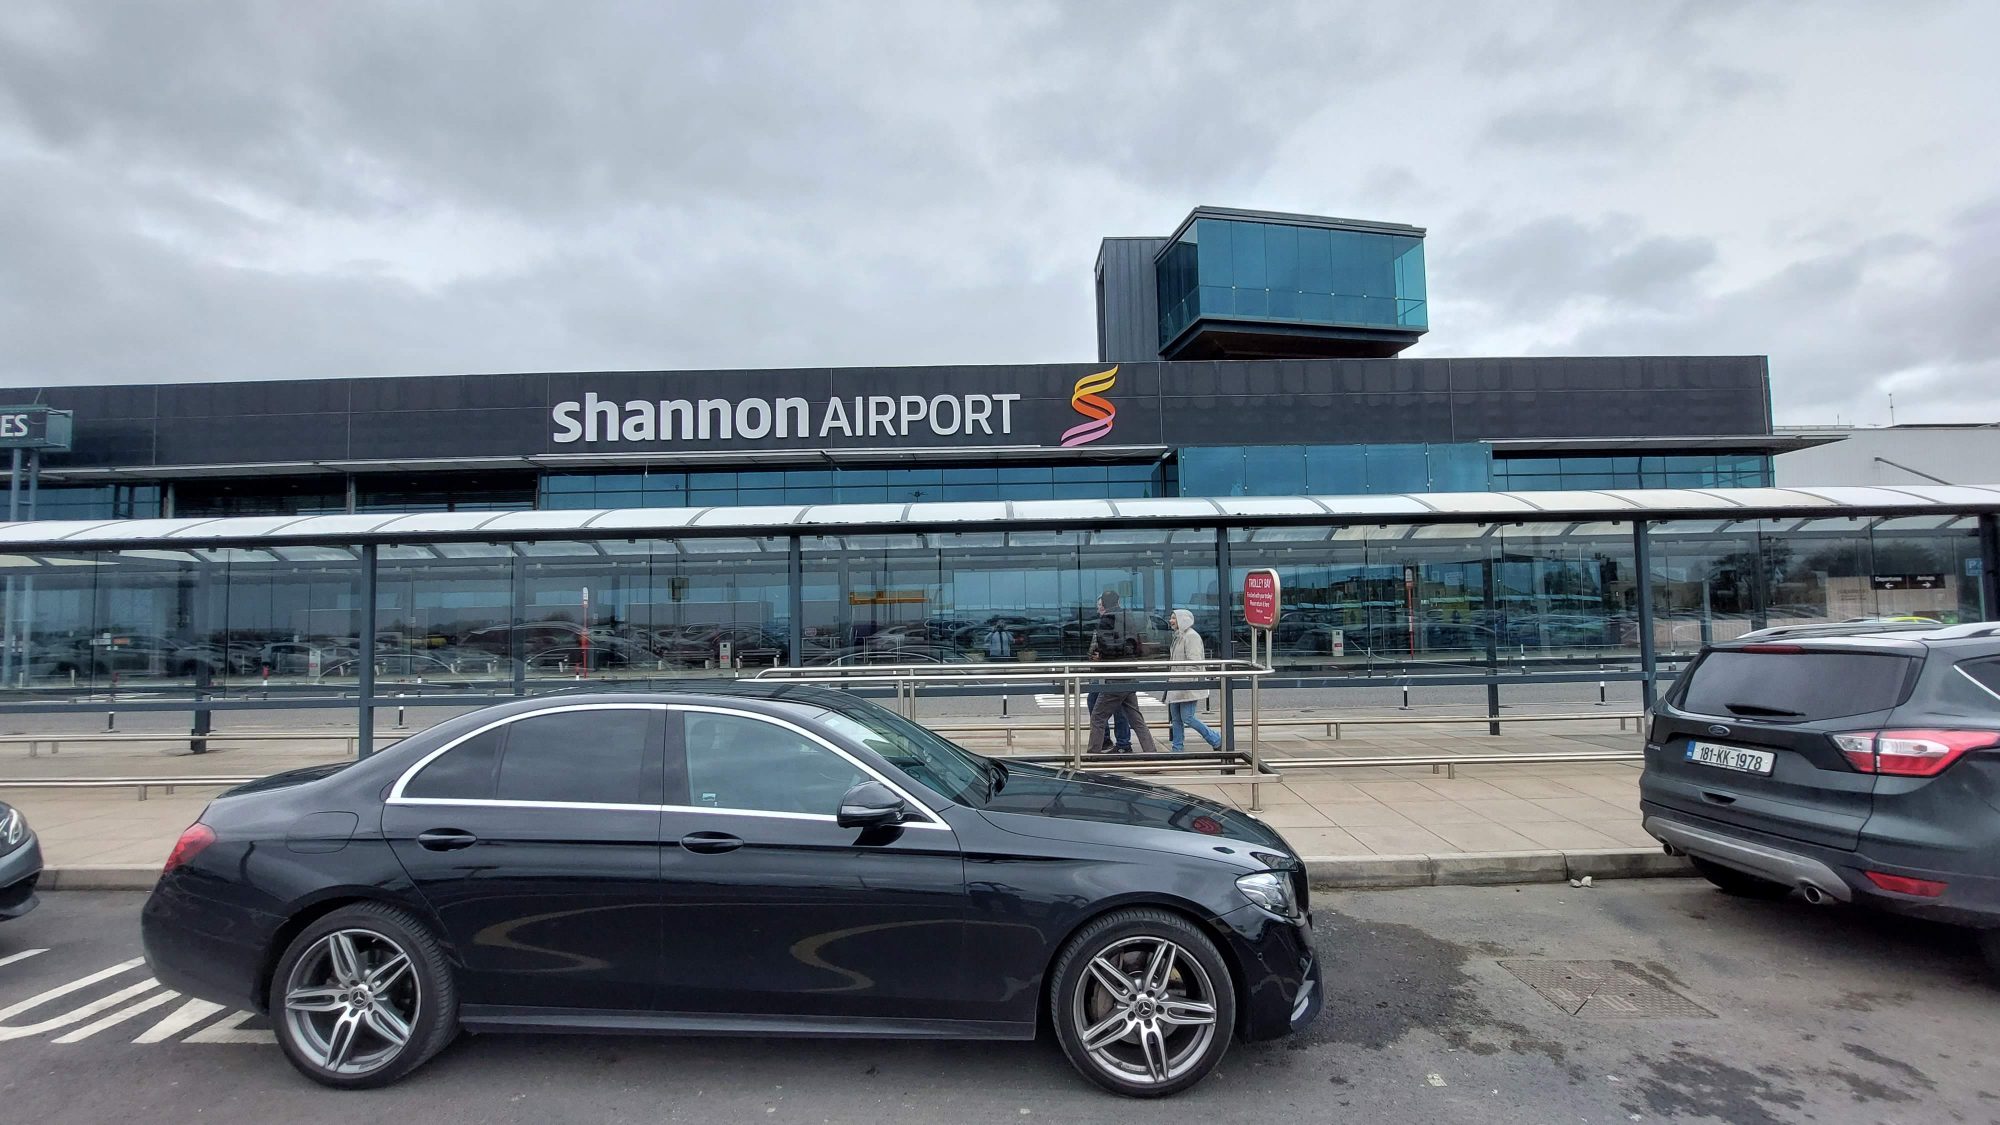 black-mercedes-benz-at-shannon-airport